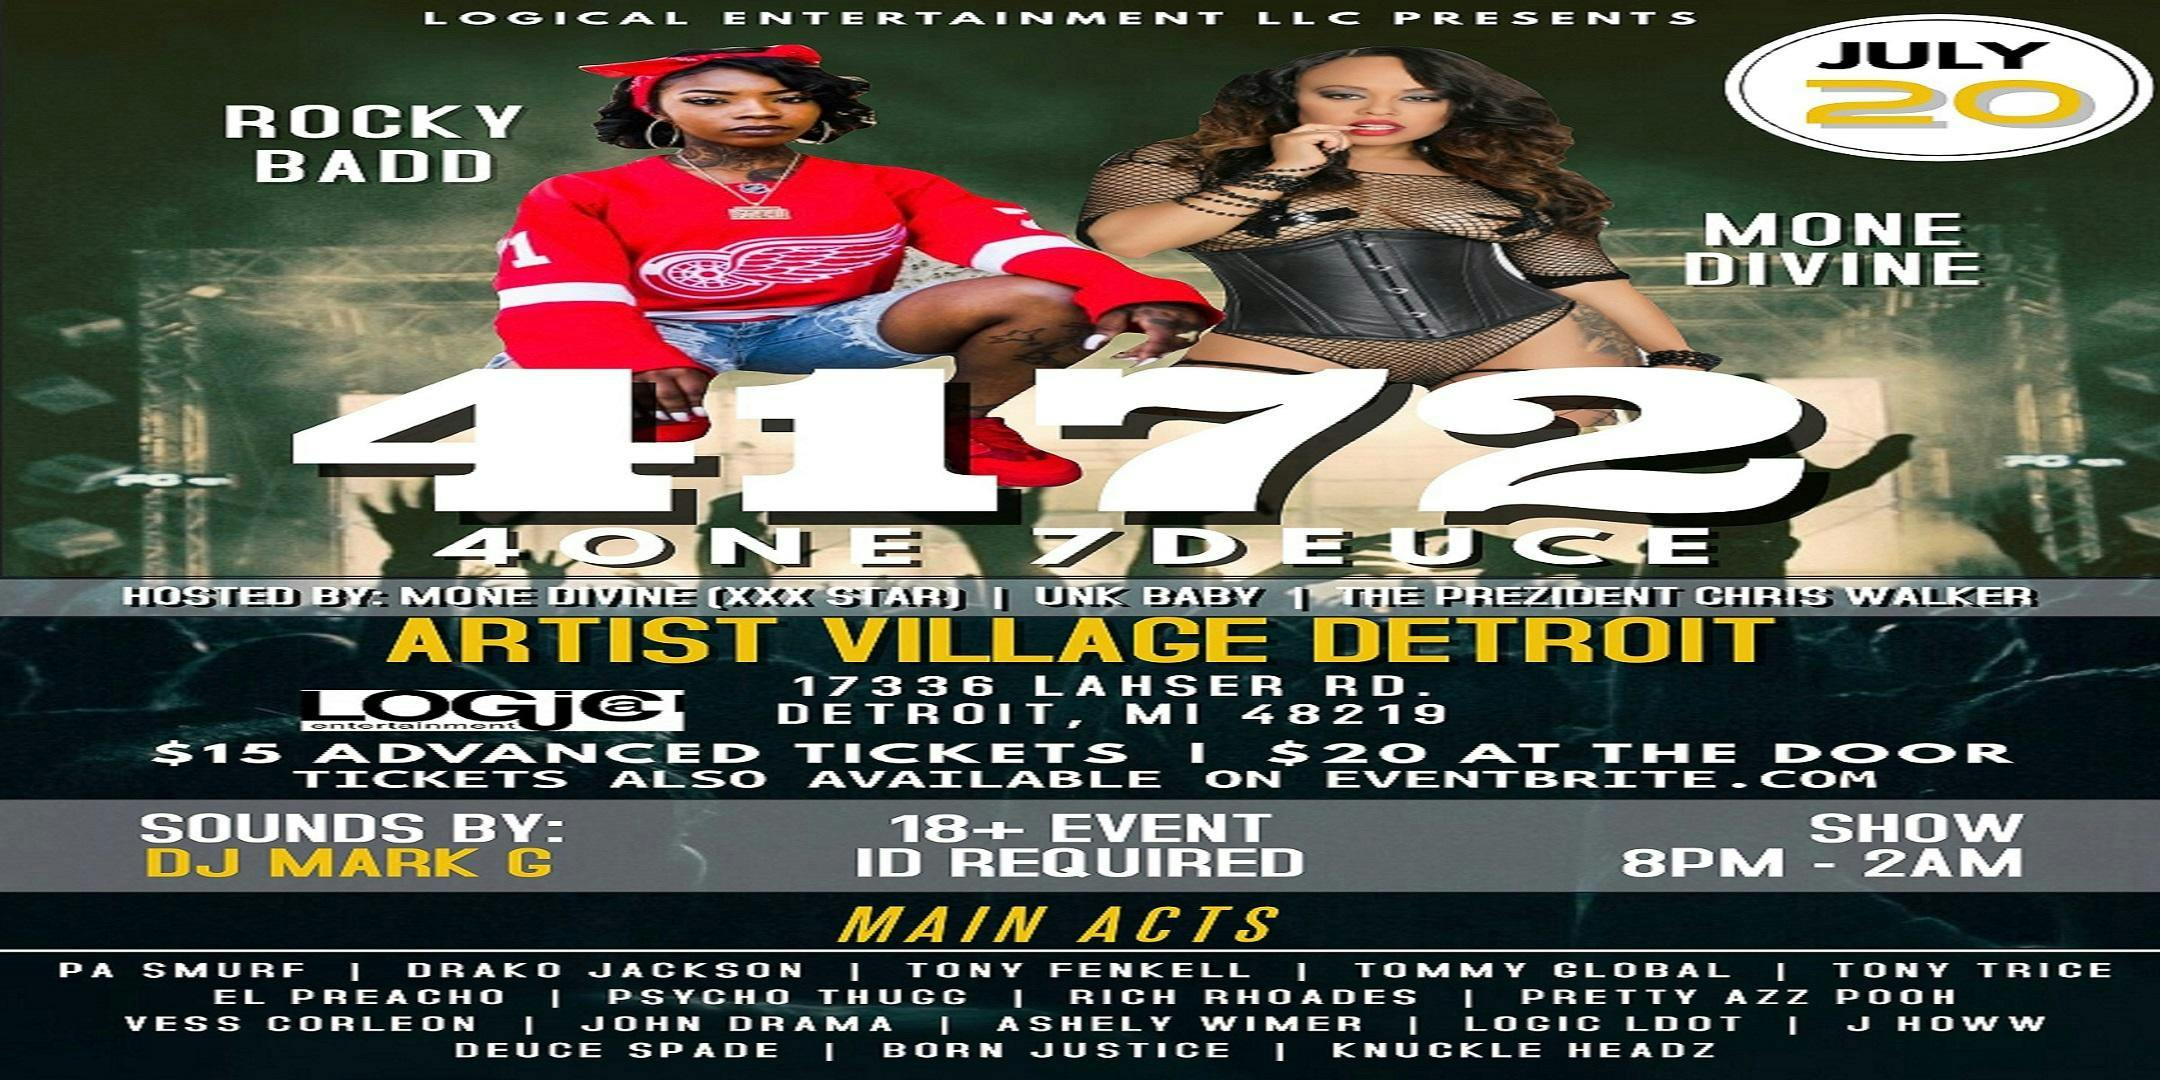 4172 Concert and Release Party Staring Rocky Badd & Mone Divine